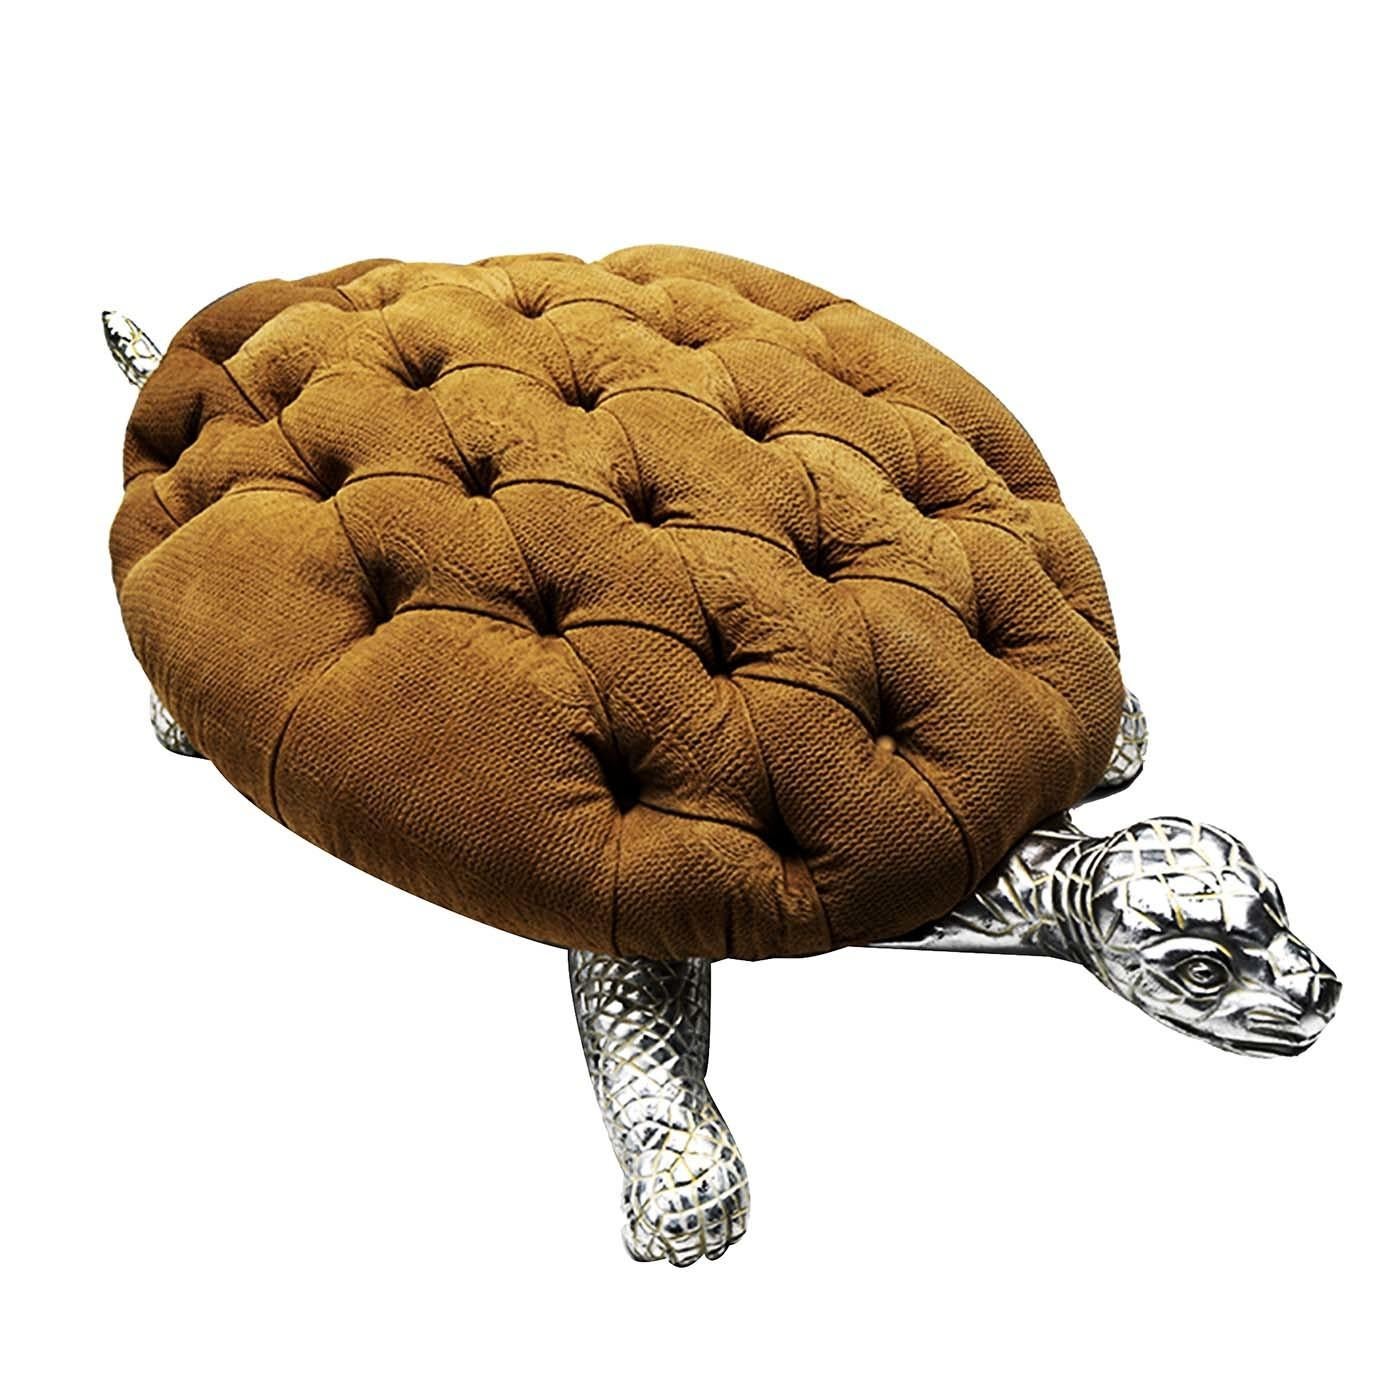 This superb pouf strikes a perfect balance between playfulness and elegance, with a designed borrowed from nature and fashioned to match a sophisticated interior. The frame of this eclectic object of functional decor is in carved wood covered with a